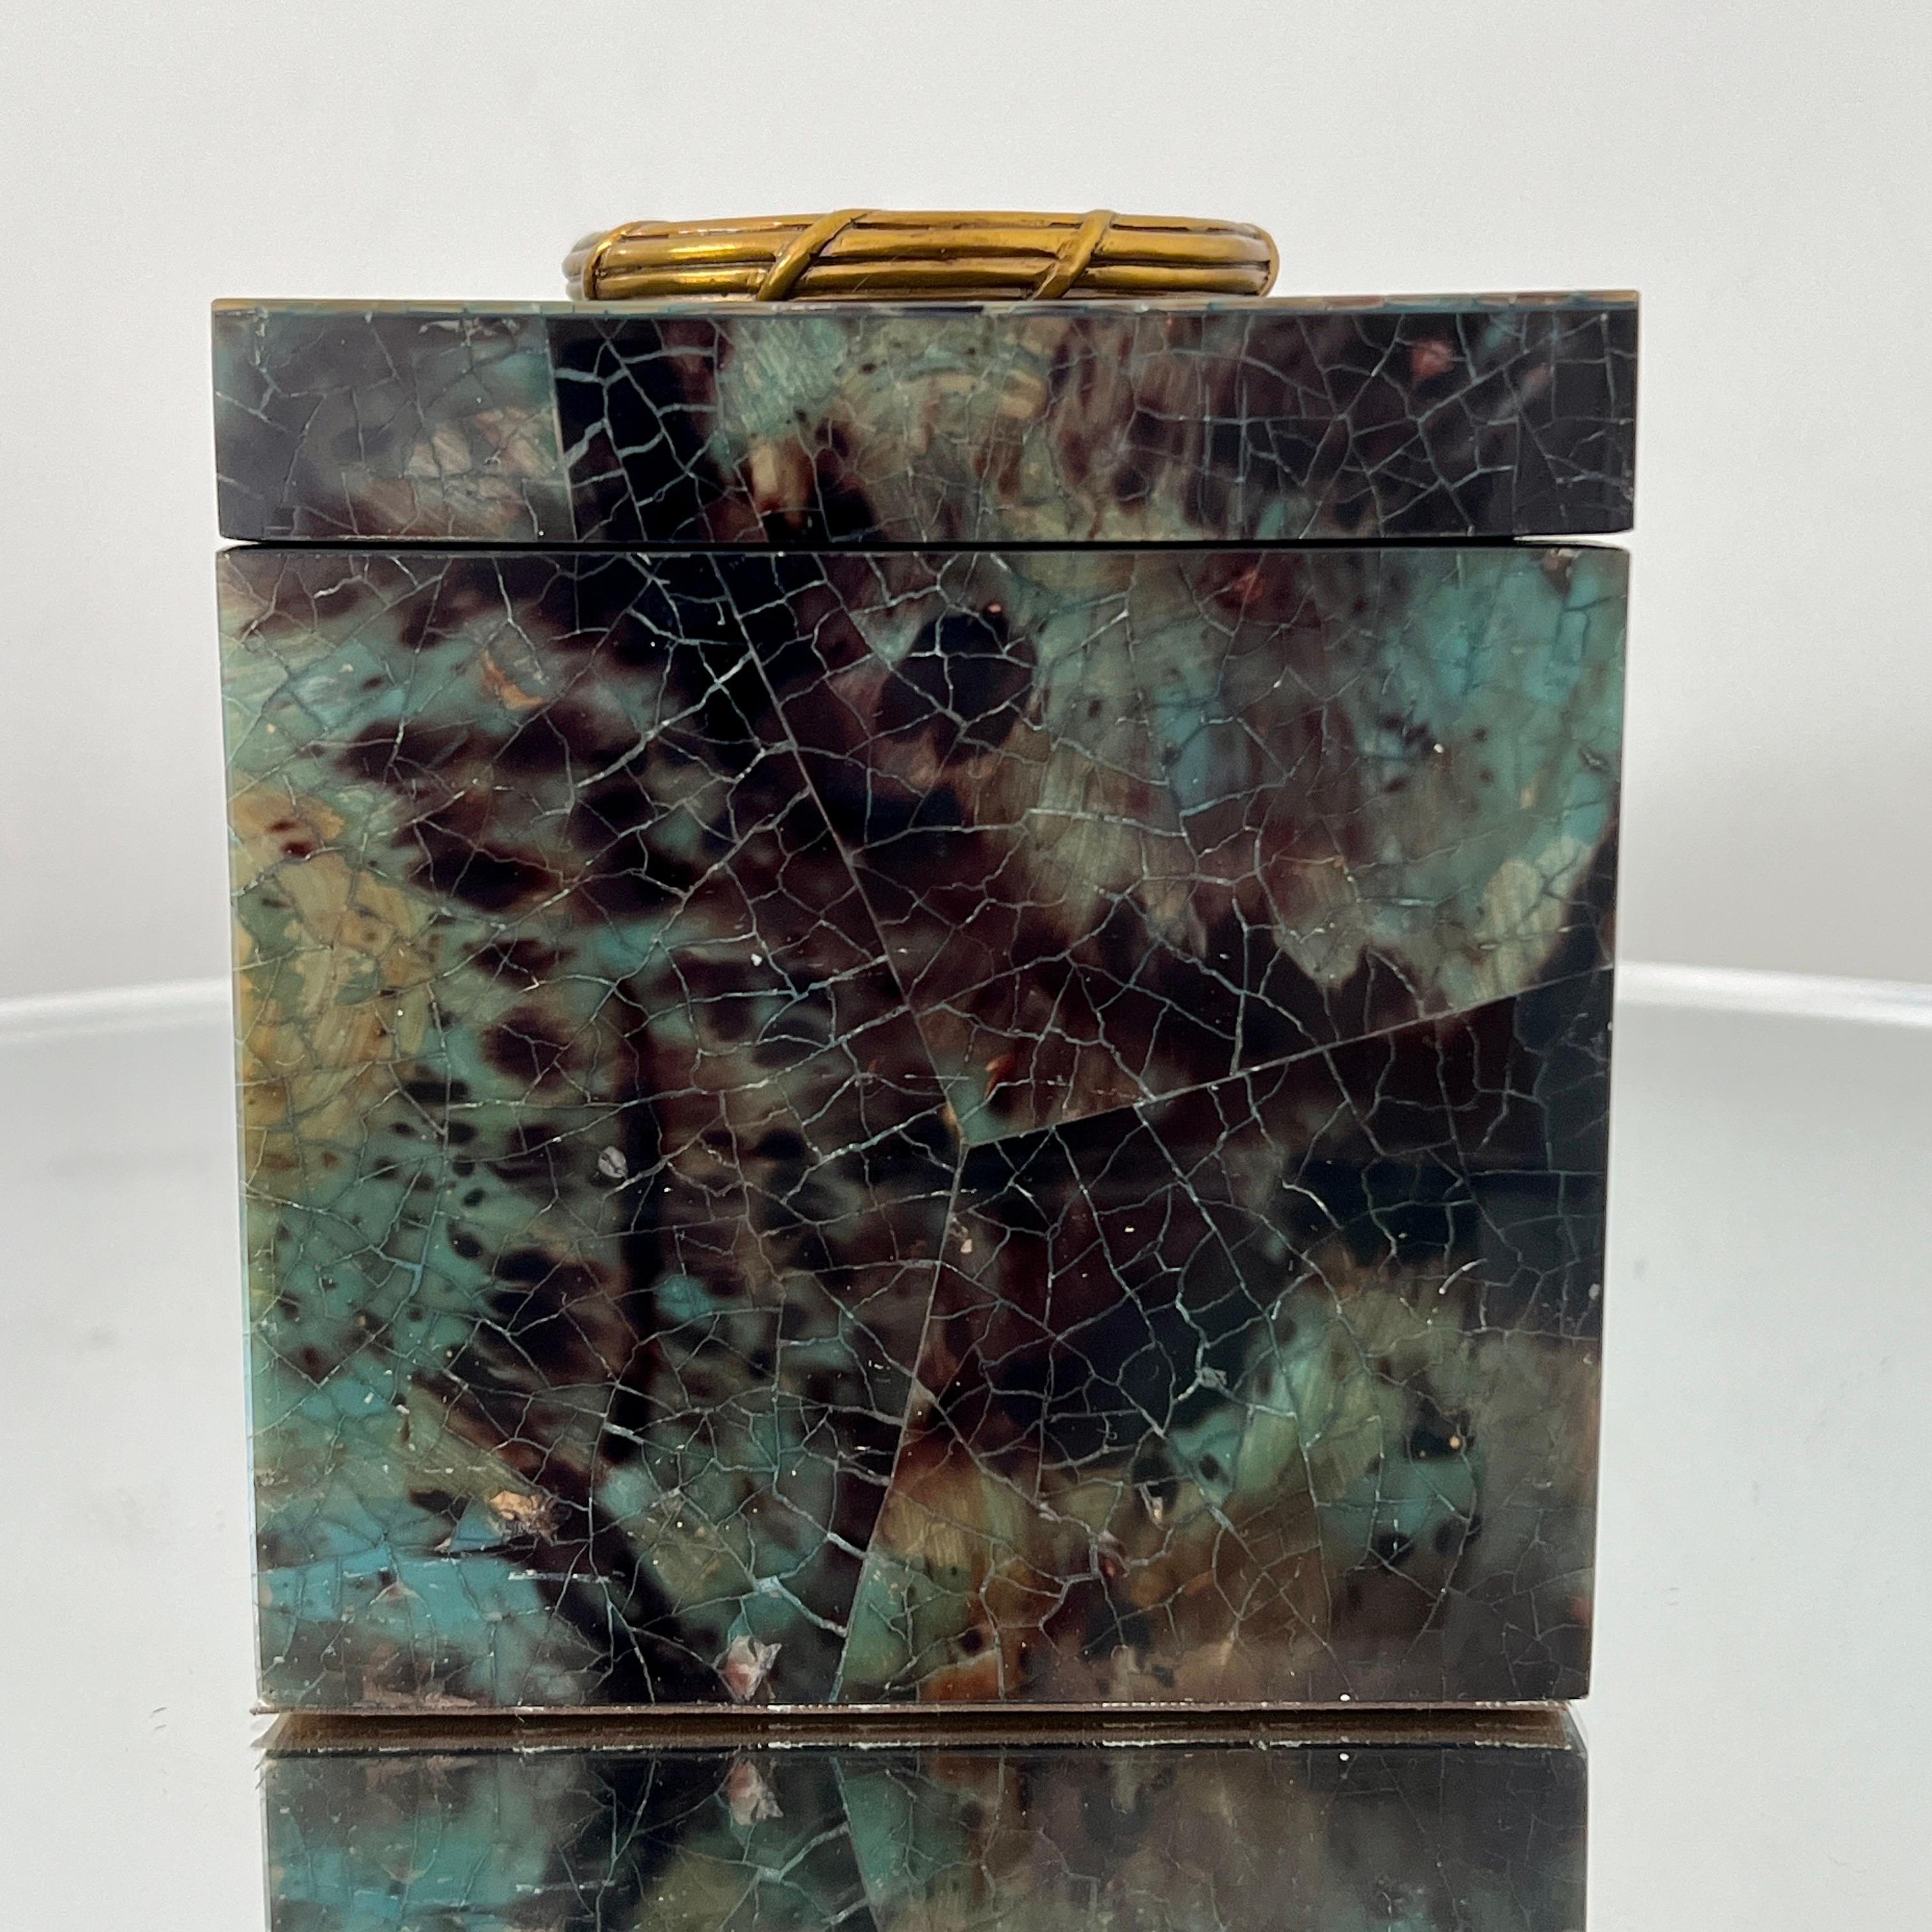 Decorative box all handcrafted in exotic materials featuring lacquered and hand dyed pen-shell over a wood frame. The box features mosaic shell inlays in beautiful hues of turquoise, green, black and brown. Removable lid opens to reveal a black